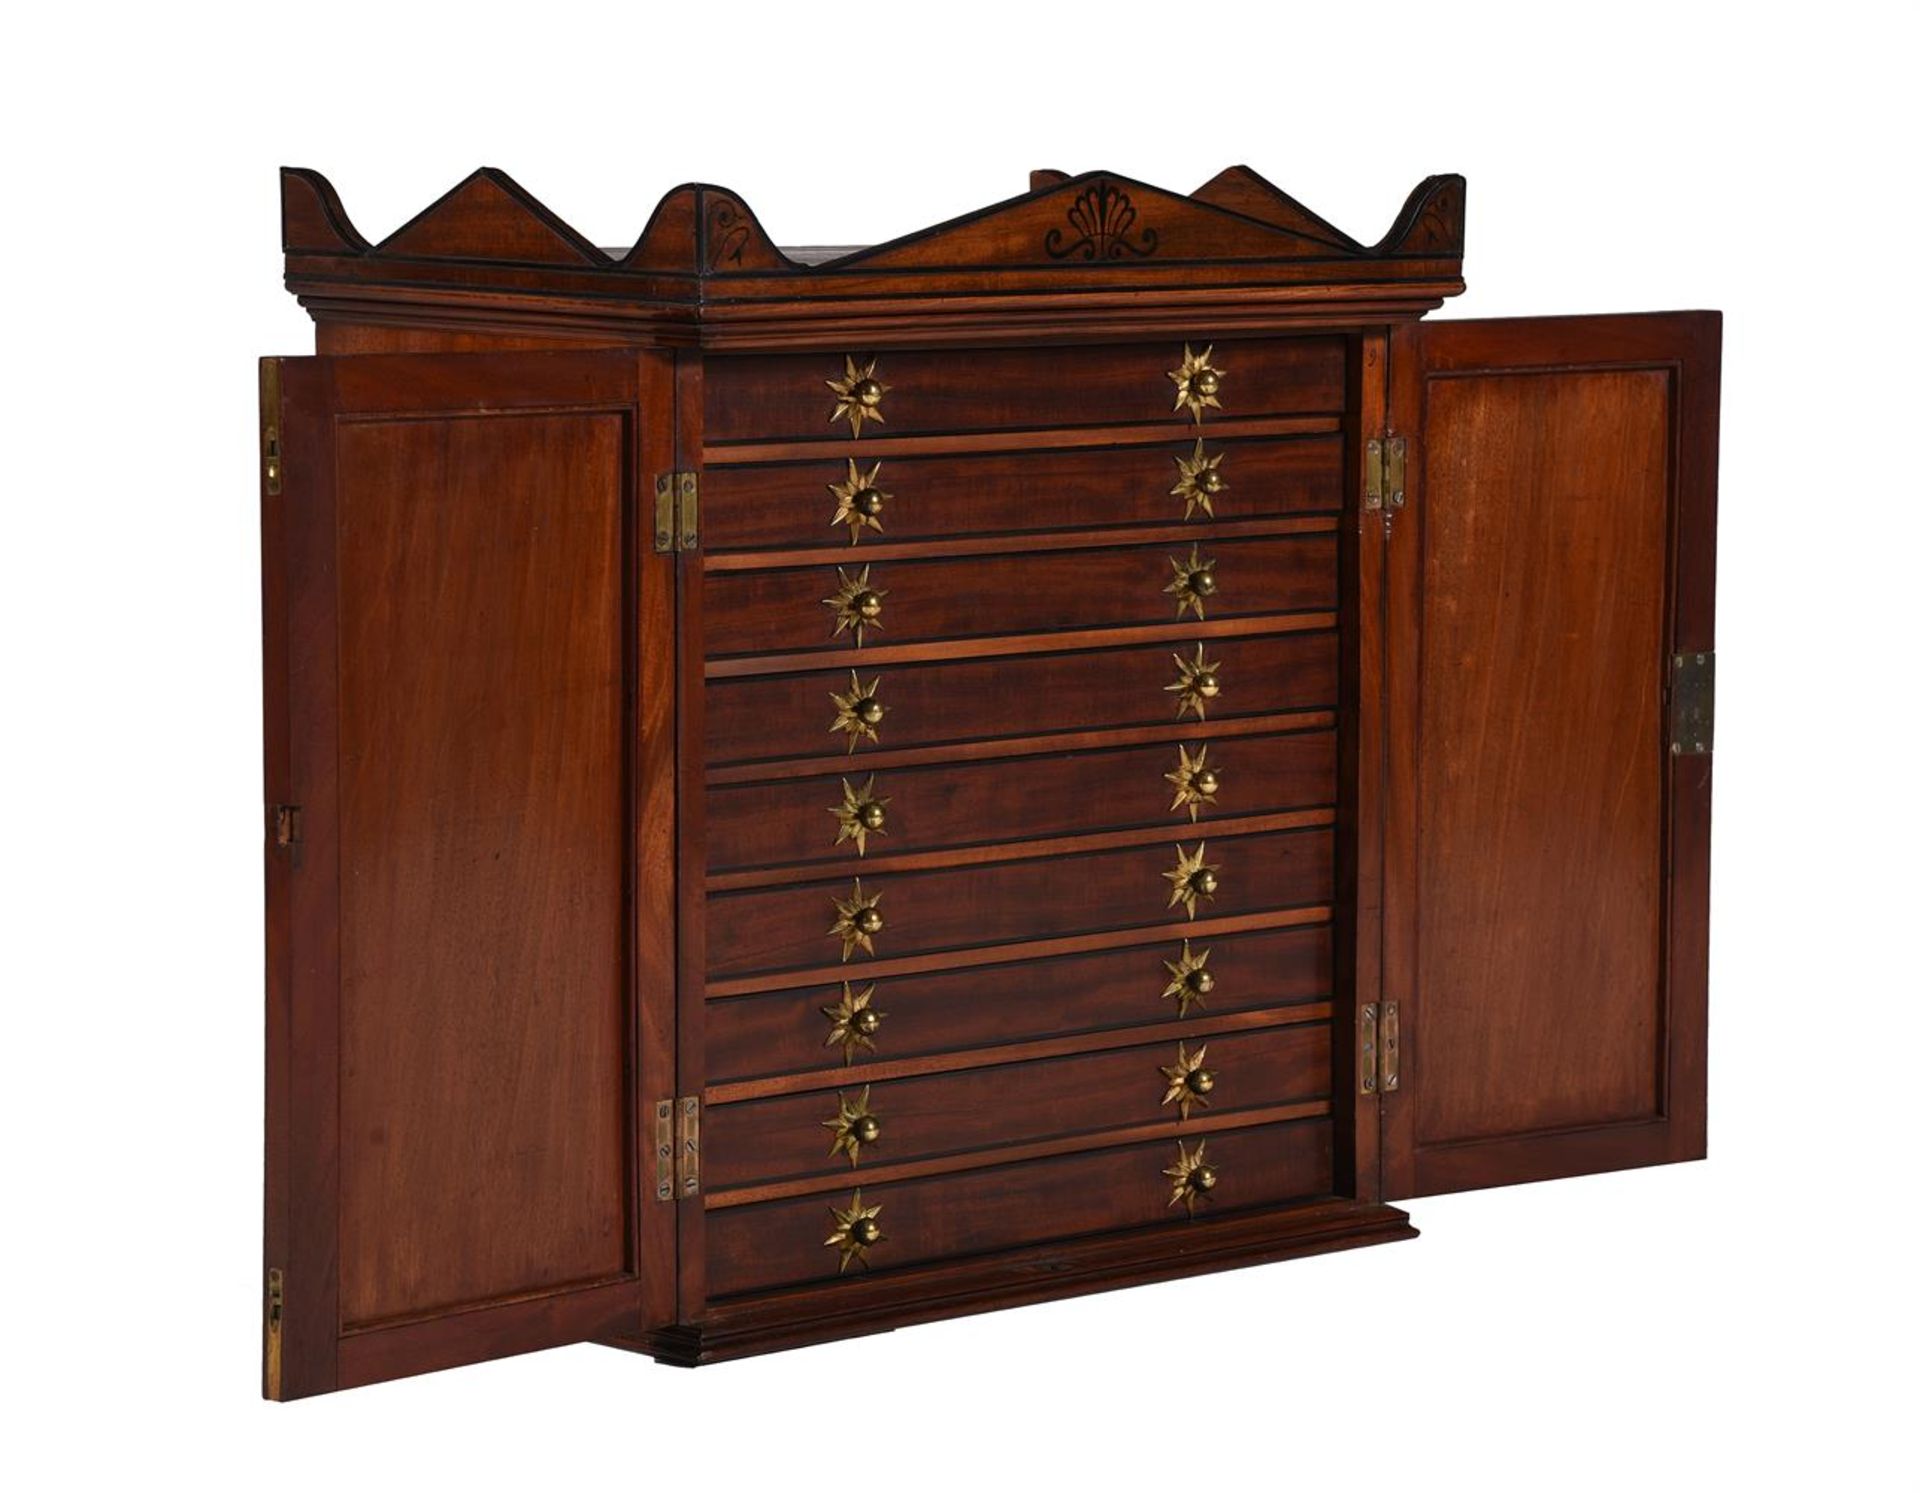 Y A REGENCY MAHOGANY AND EBONY INLAID COLLECTORS CABINET, EARLY 19TH CENTURY - Image 3 of 9